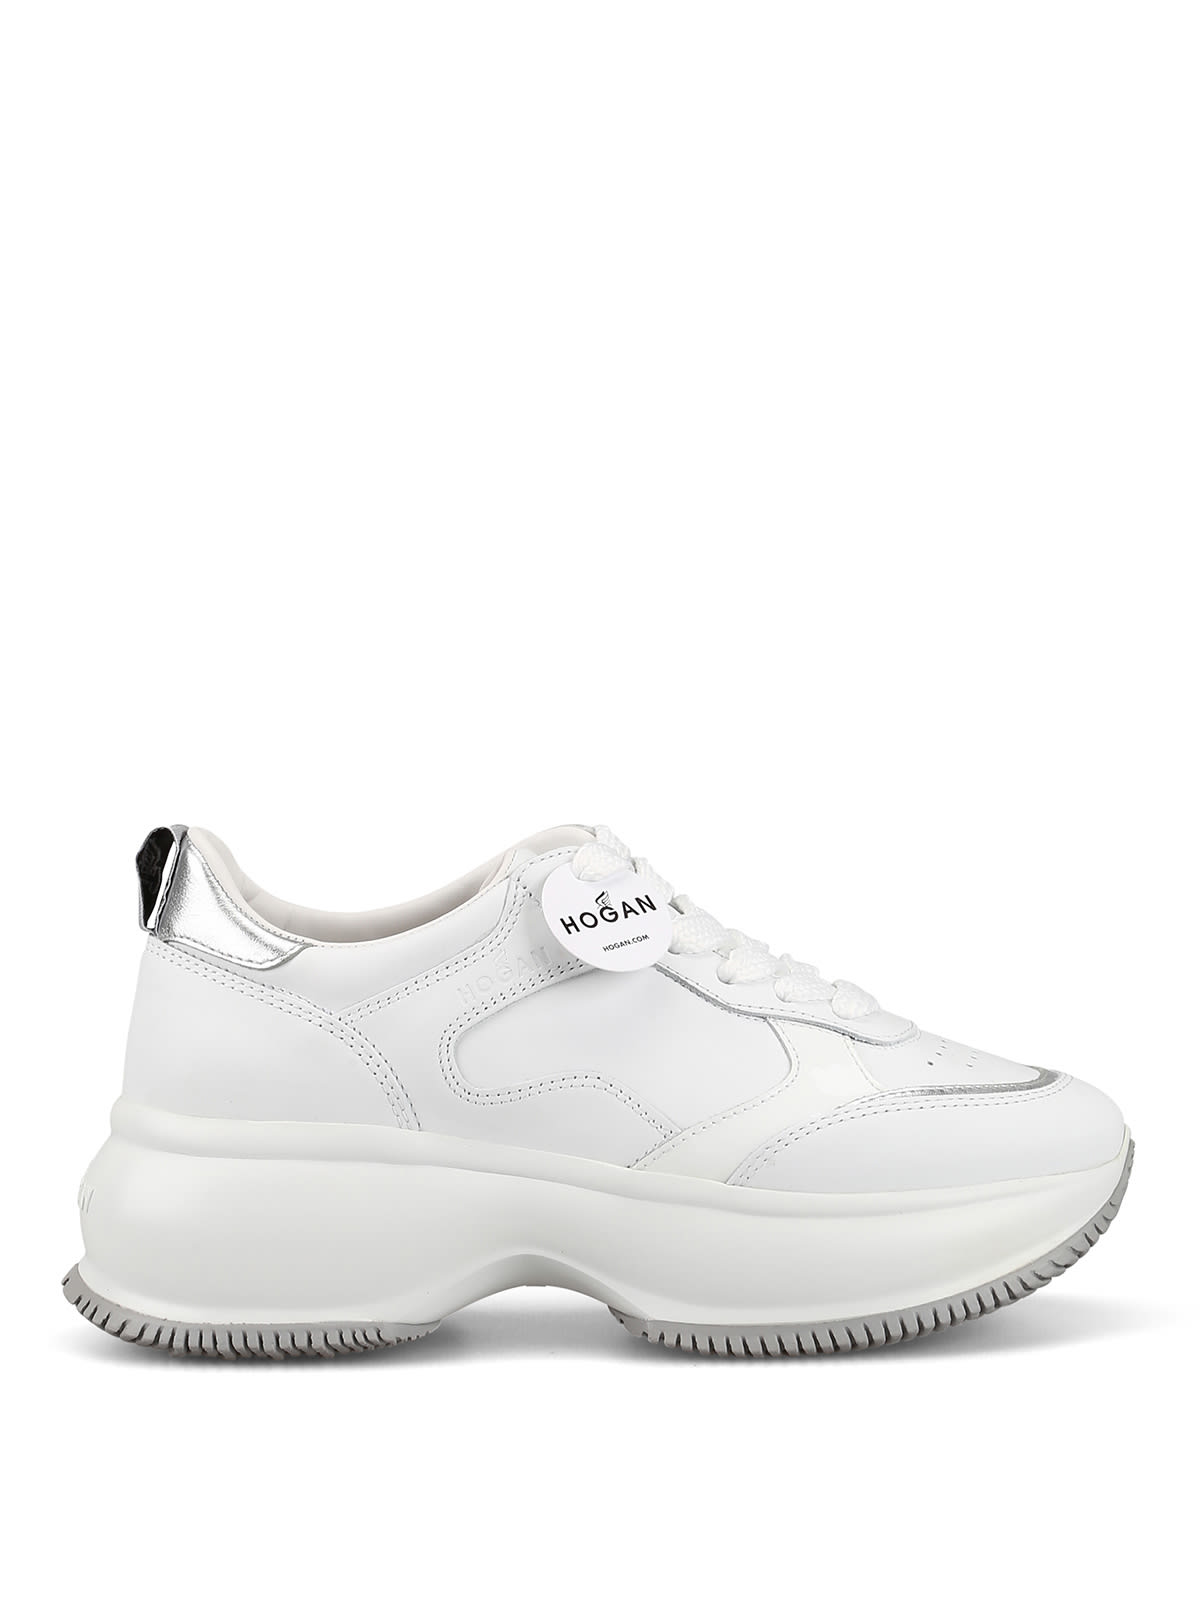 Hogan Maxi I Active Sneakers In White